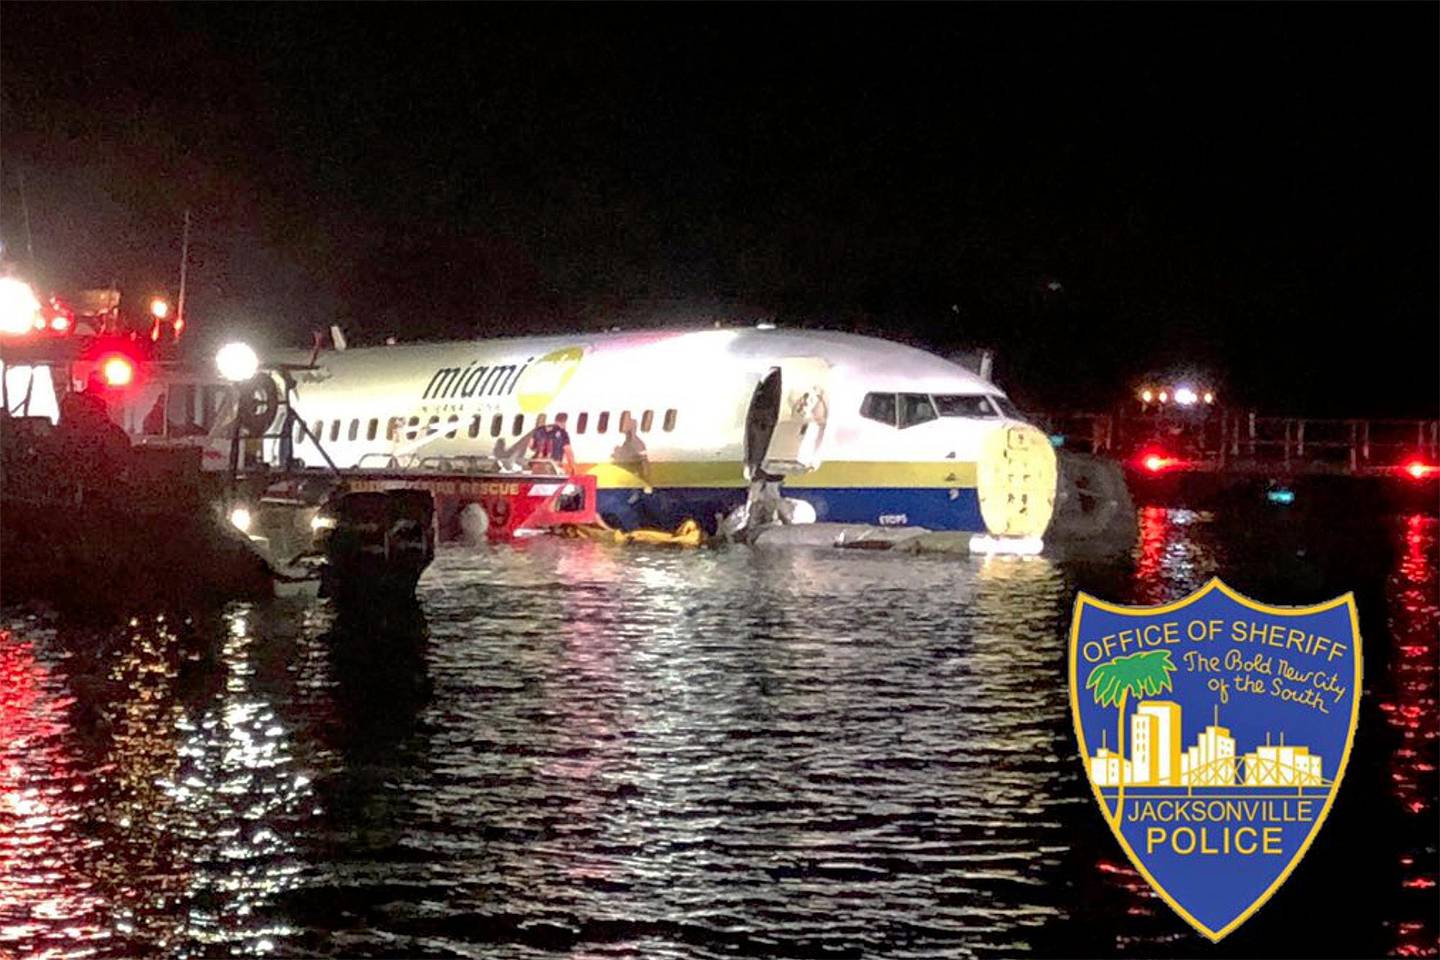 In this photo released by the Jacksonville Sheriff's Office, authorities work at the scene of a plane in the water in Jacksonville, Fla., Friday, May 3, 2019. Officials say a charter plane traveling from Cuba to north Florida ended up in a river at the end of a runway. A Naval Air Station Jacksonville news release says a Boeing 737 arriving from Naval Station Guantanamo Bay, Cuba, crashed into the St. Johns River Friday night. (Jacksonville Sheriff's Office via AP)